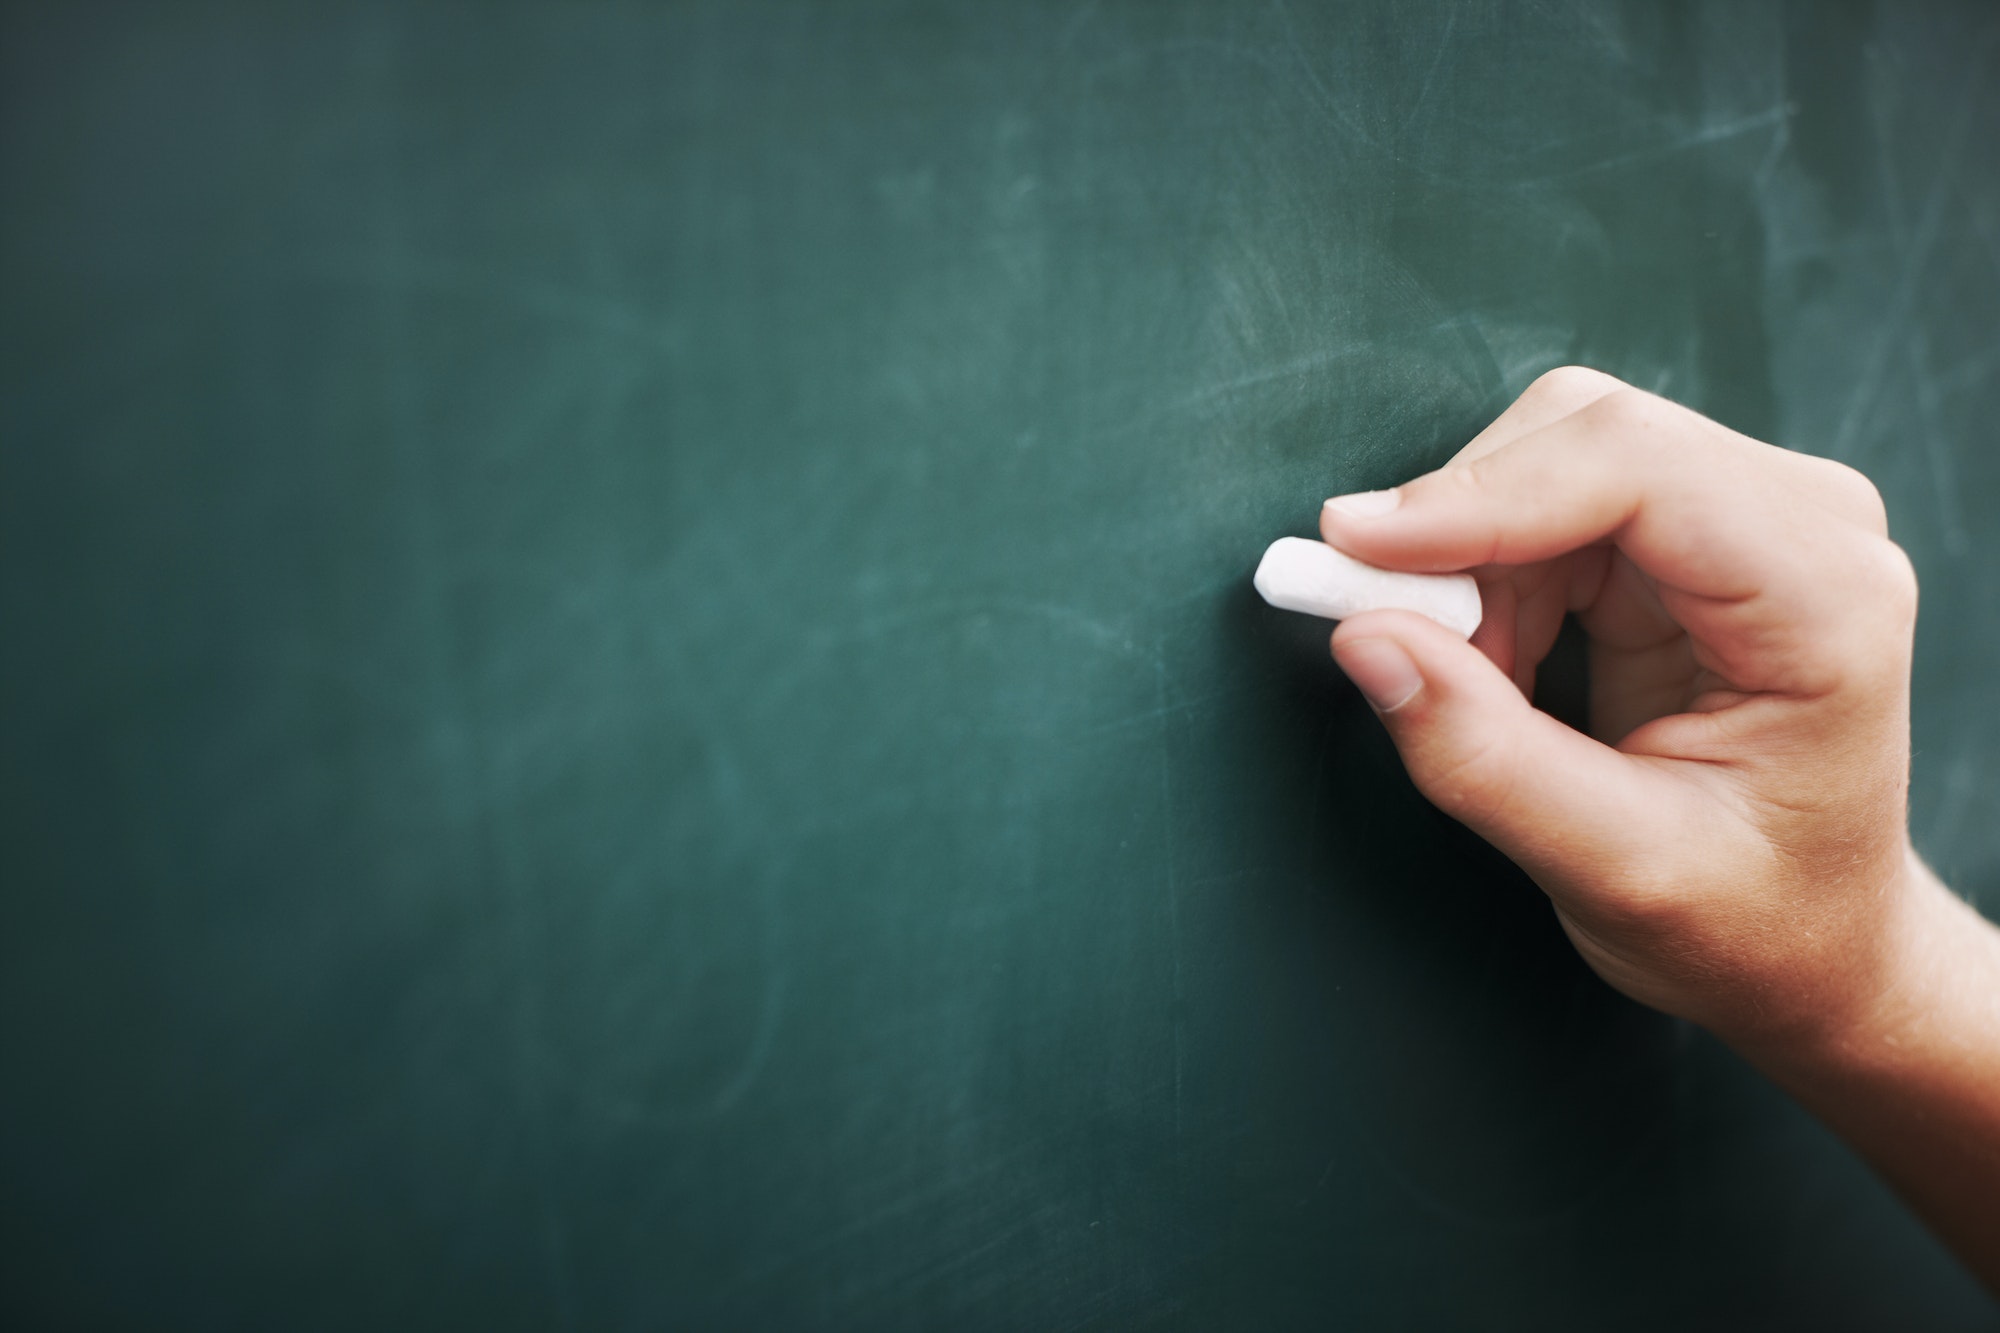 Cropped image of a young boys hand writing on a blackboard with a piece of chalk